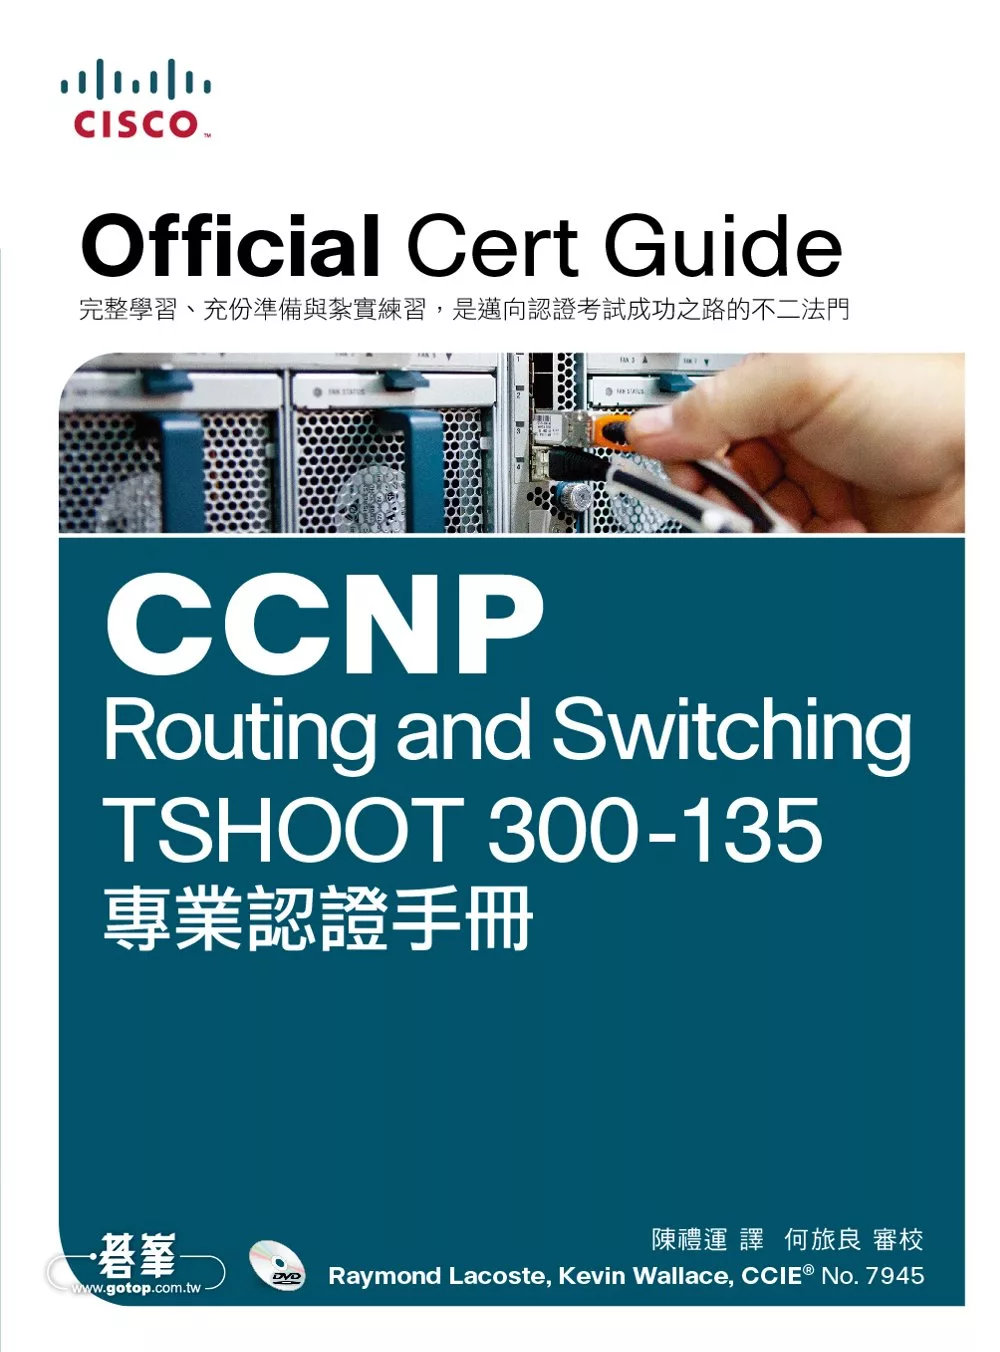 CCNP Routing and Switching TSHOOT 300-135 專業認證手冊 (電子書)